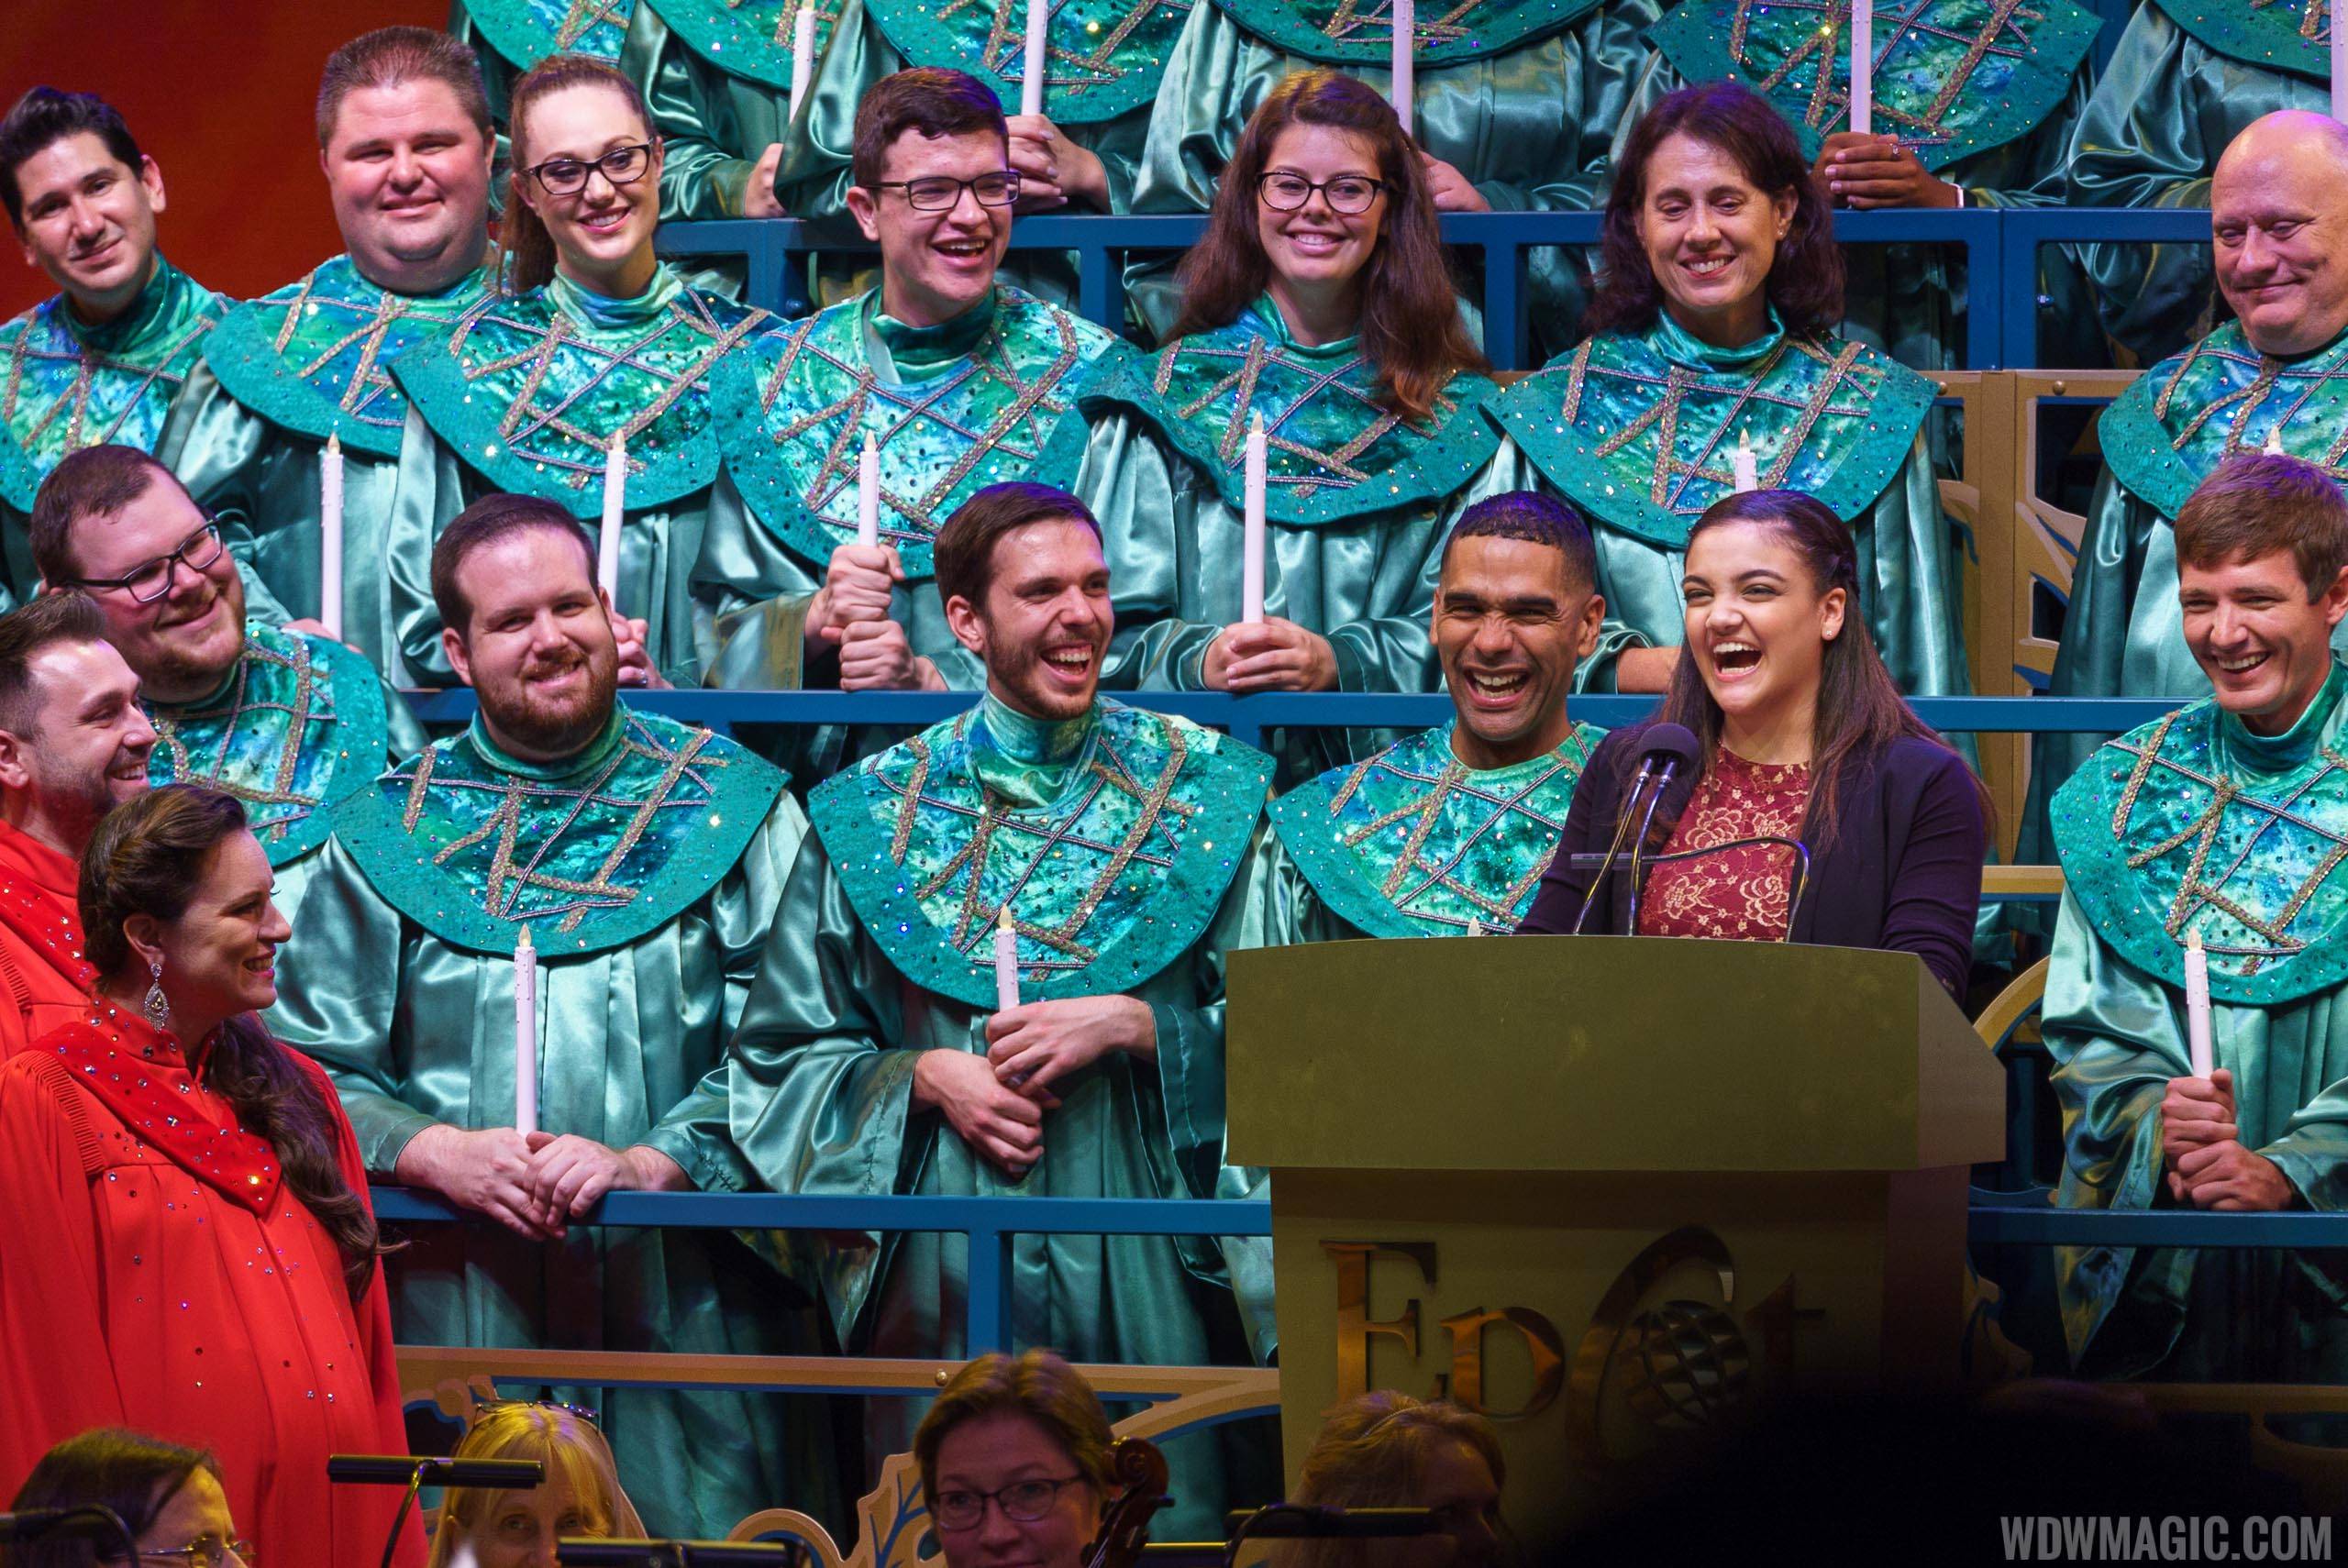 PHOTOS - Olympic Gold Medalist Laurie Hernandez opens this year's Candlelight Processional